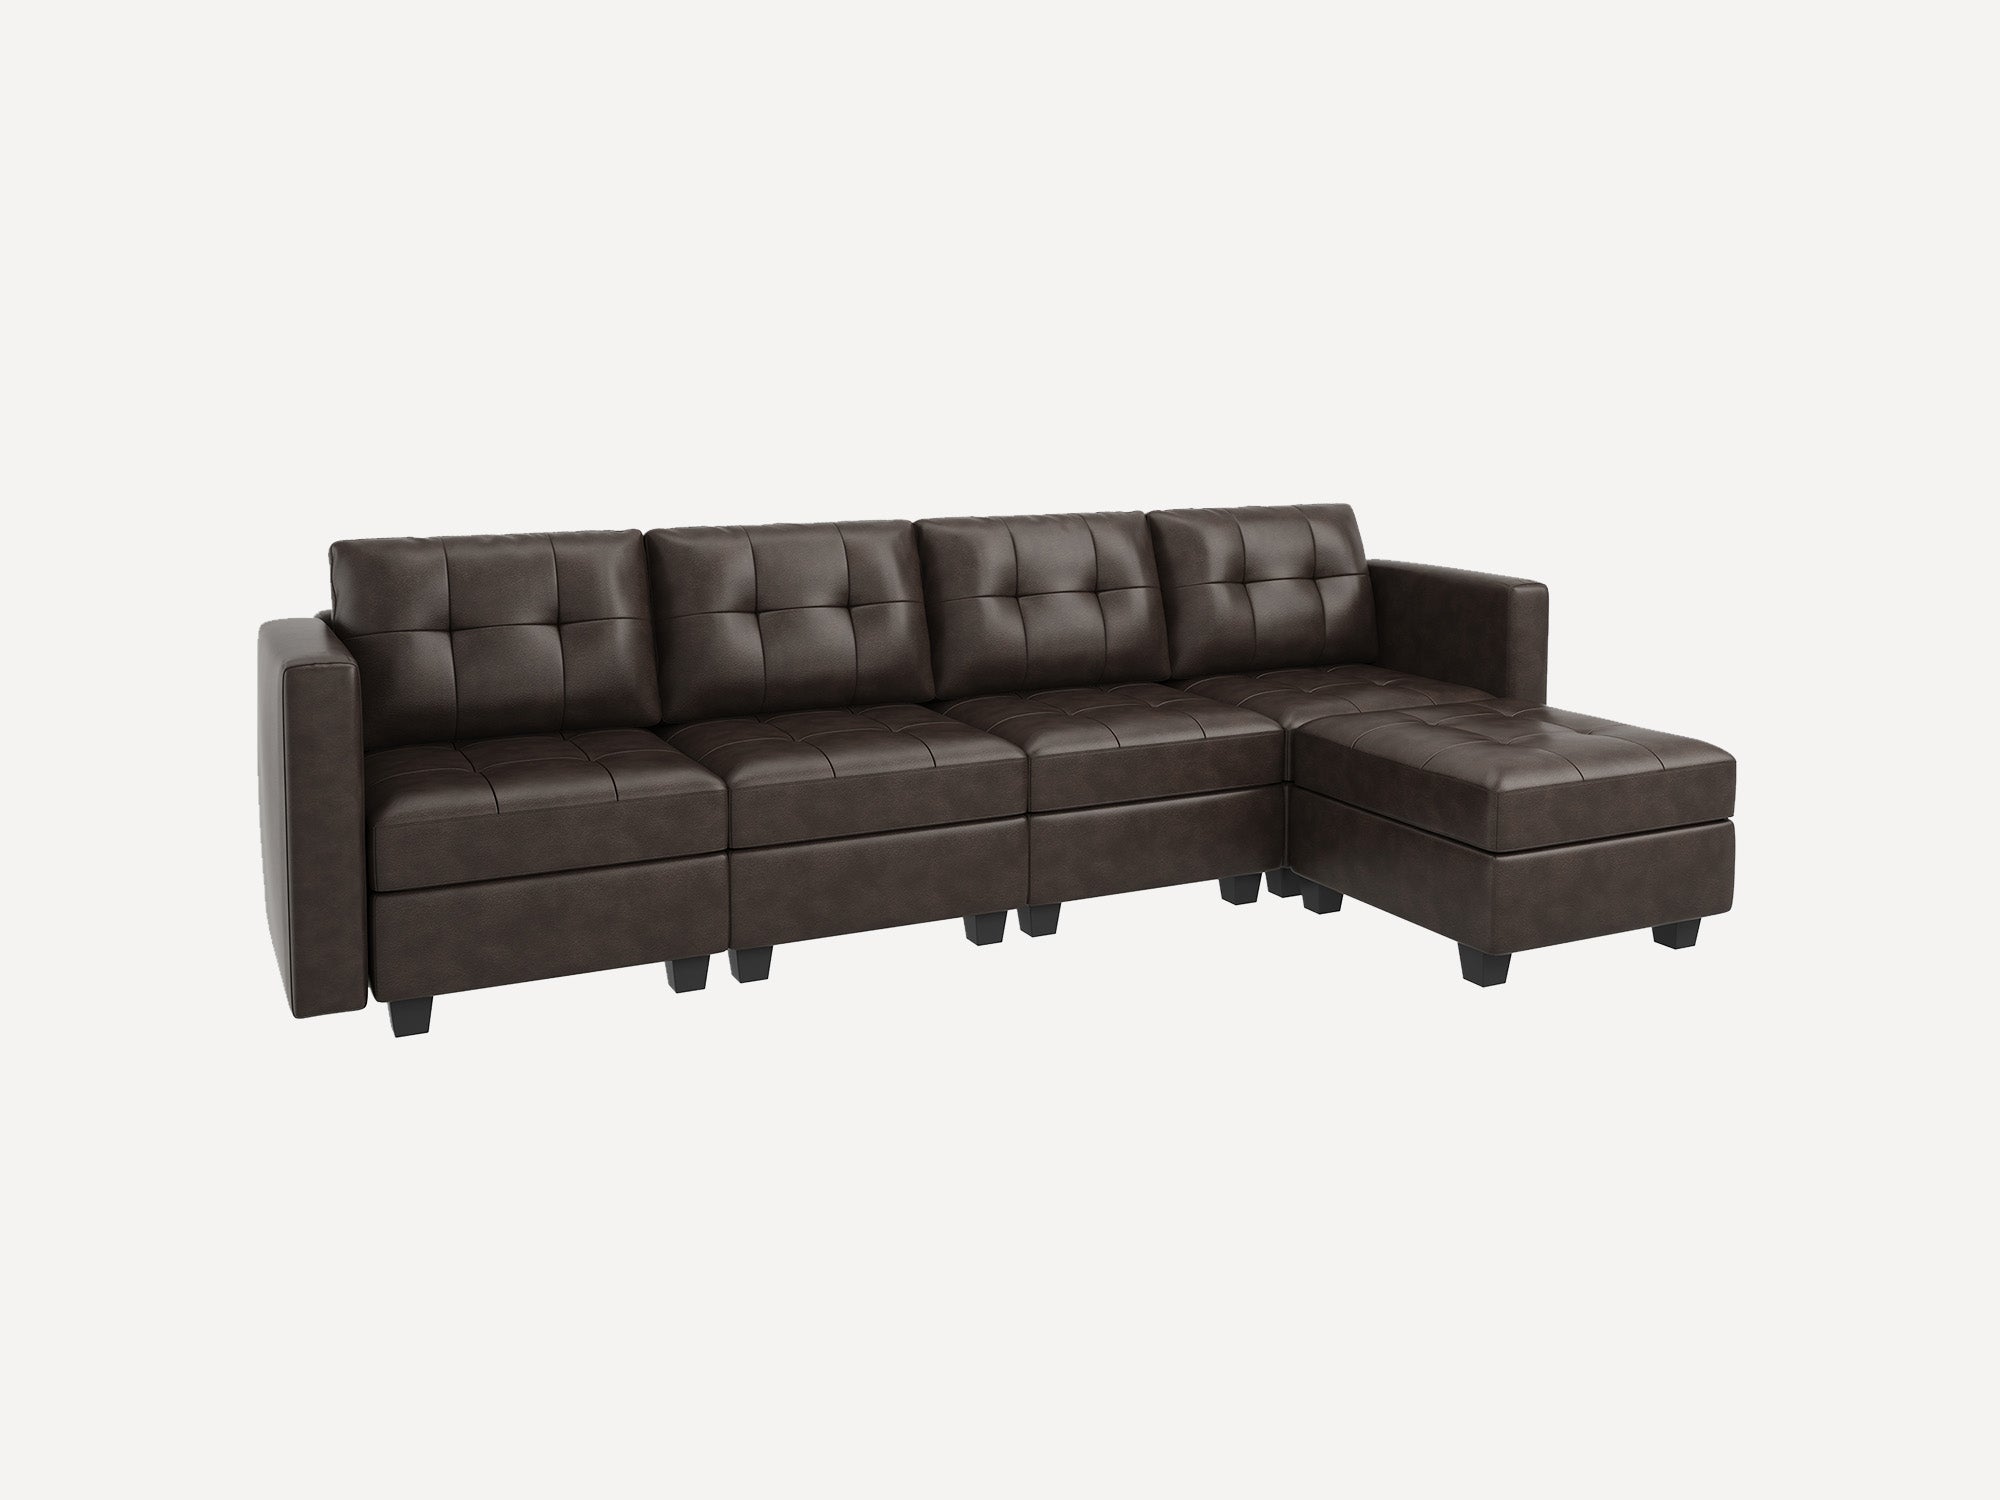 HONBAY 5-Piece Faux Leather Modular Sectional With Storage Seat